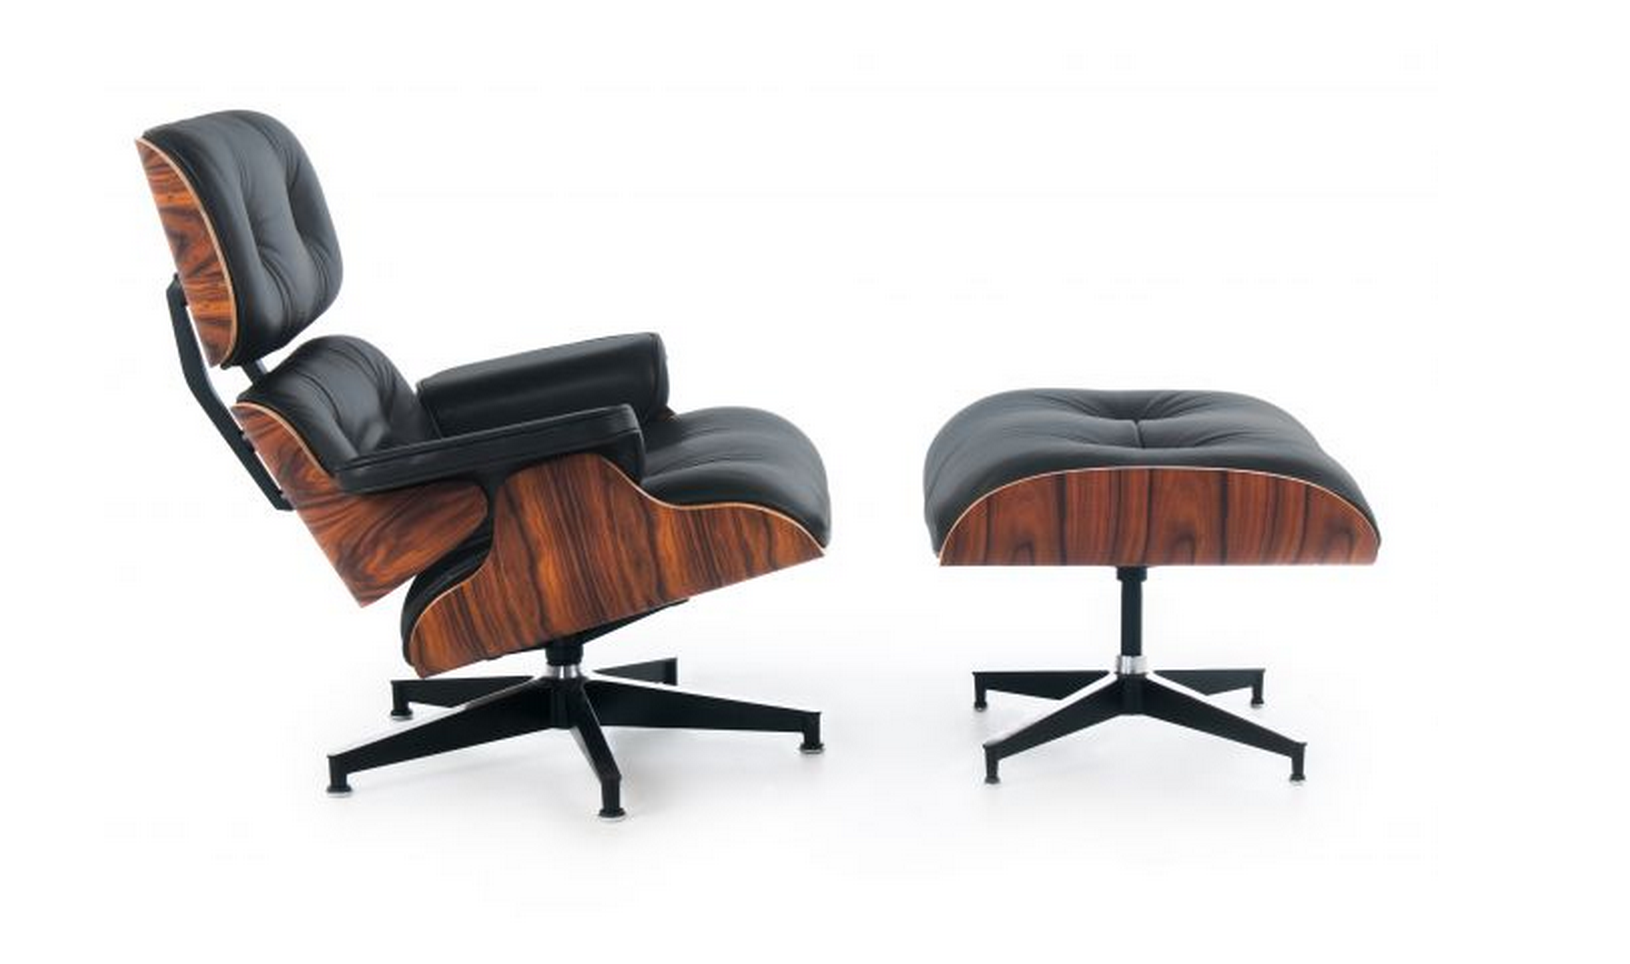 Eames Style Lounge Chair with Ottoman (Rosewood)